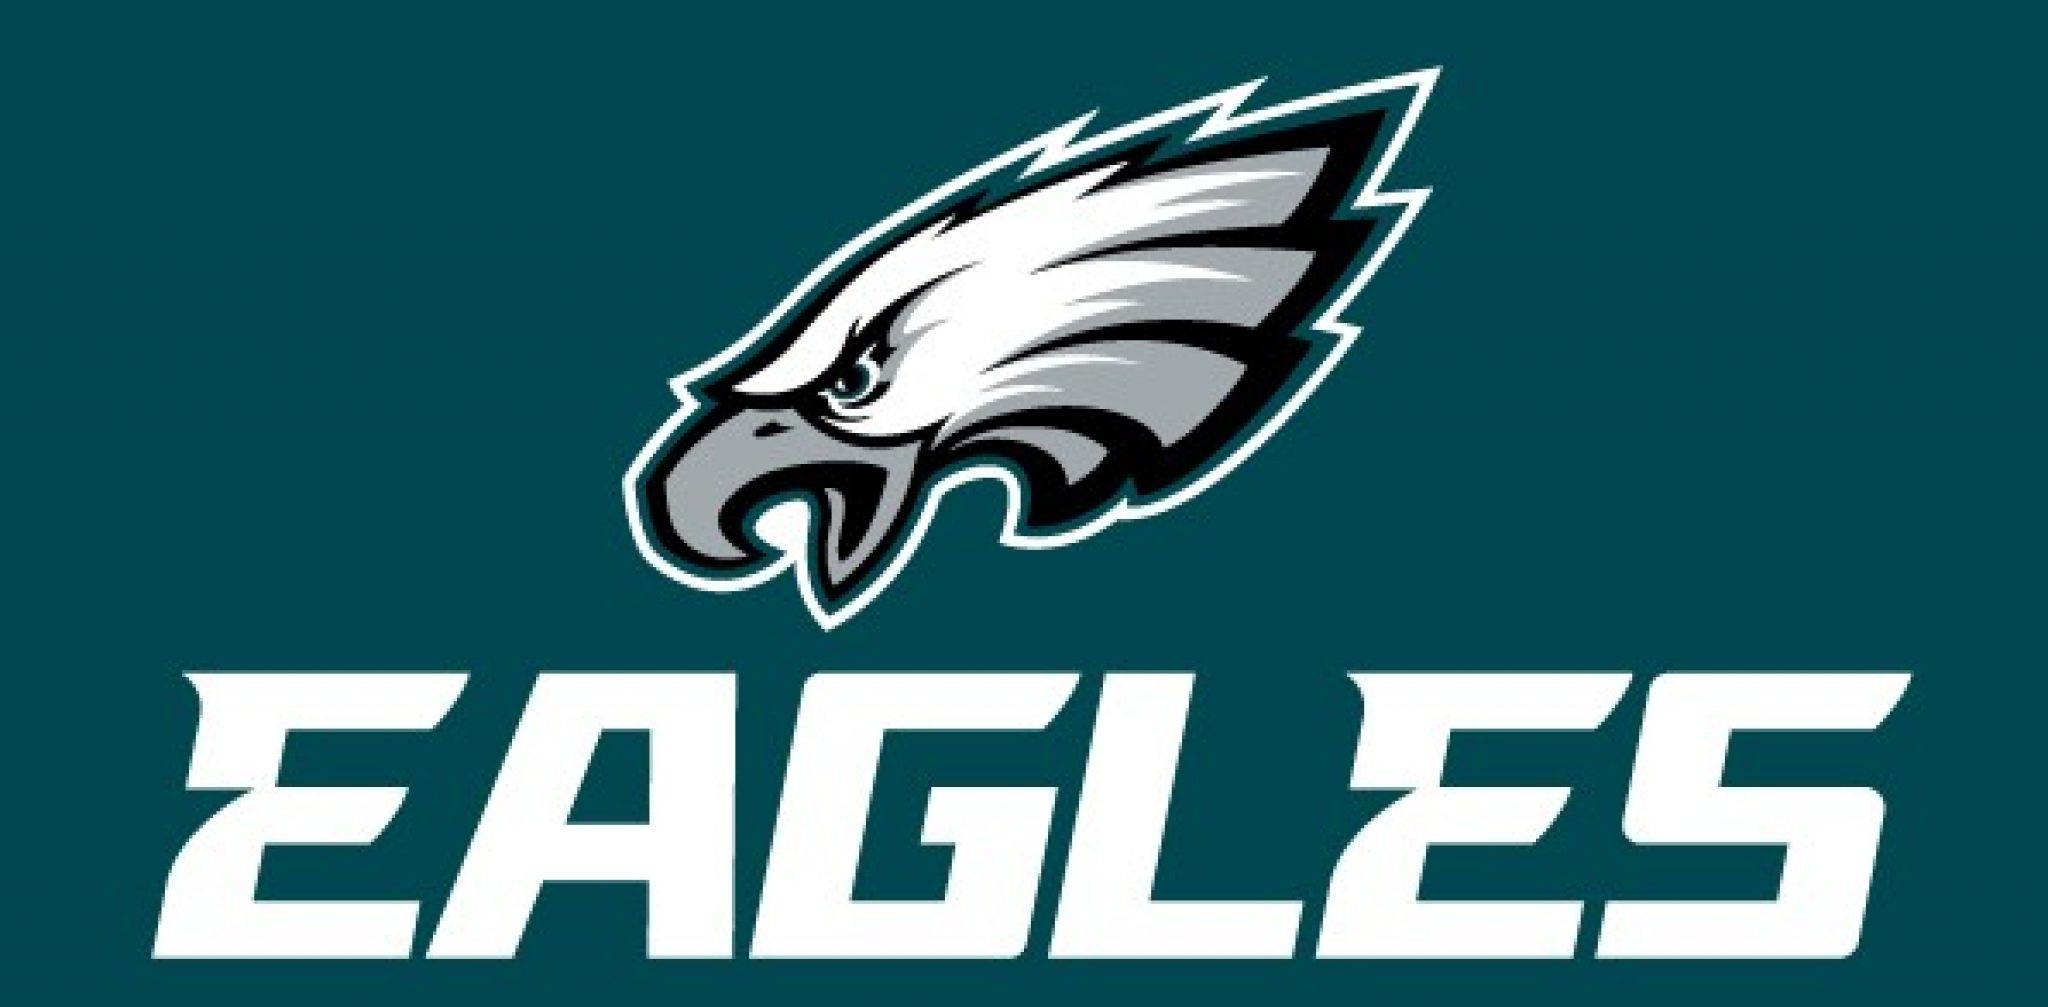 Philadelphia Eagles Football Schedule for Games 2022